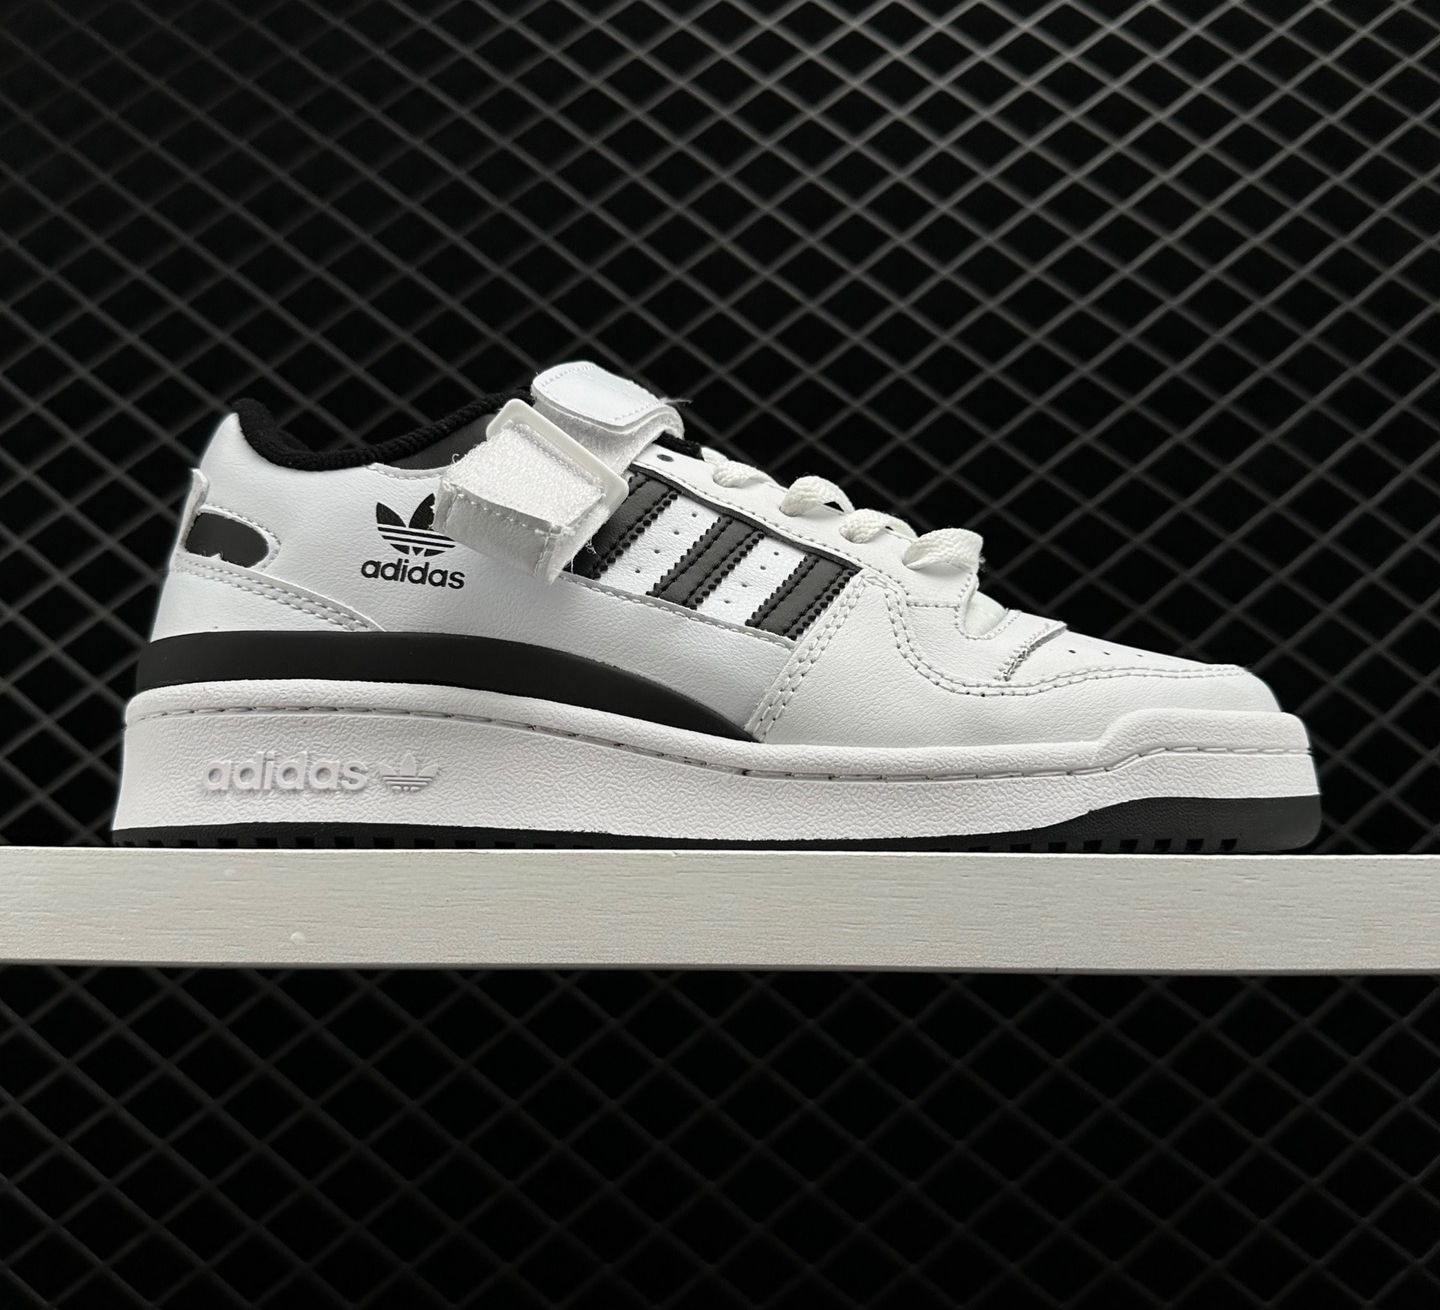 Adidas Forum Low 'White Black' FY7757 - Stylish & Classic Sneakers